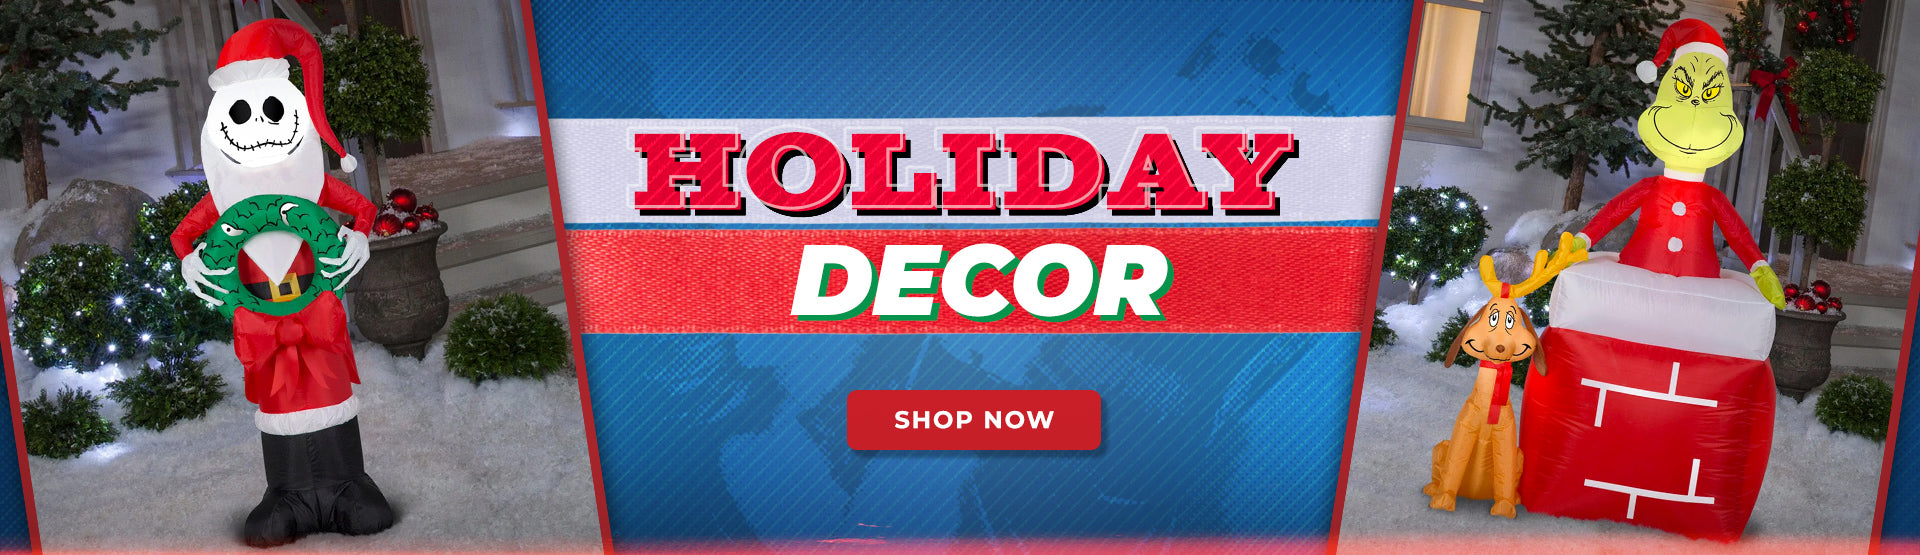 Shop Holiday Decor at Costumes.com - The Grinch, Nightmare Before Christmas and other Christmas decor